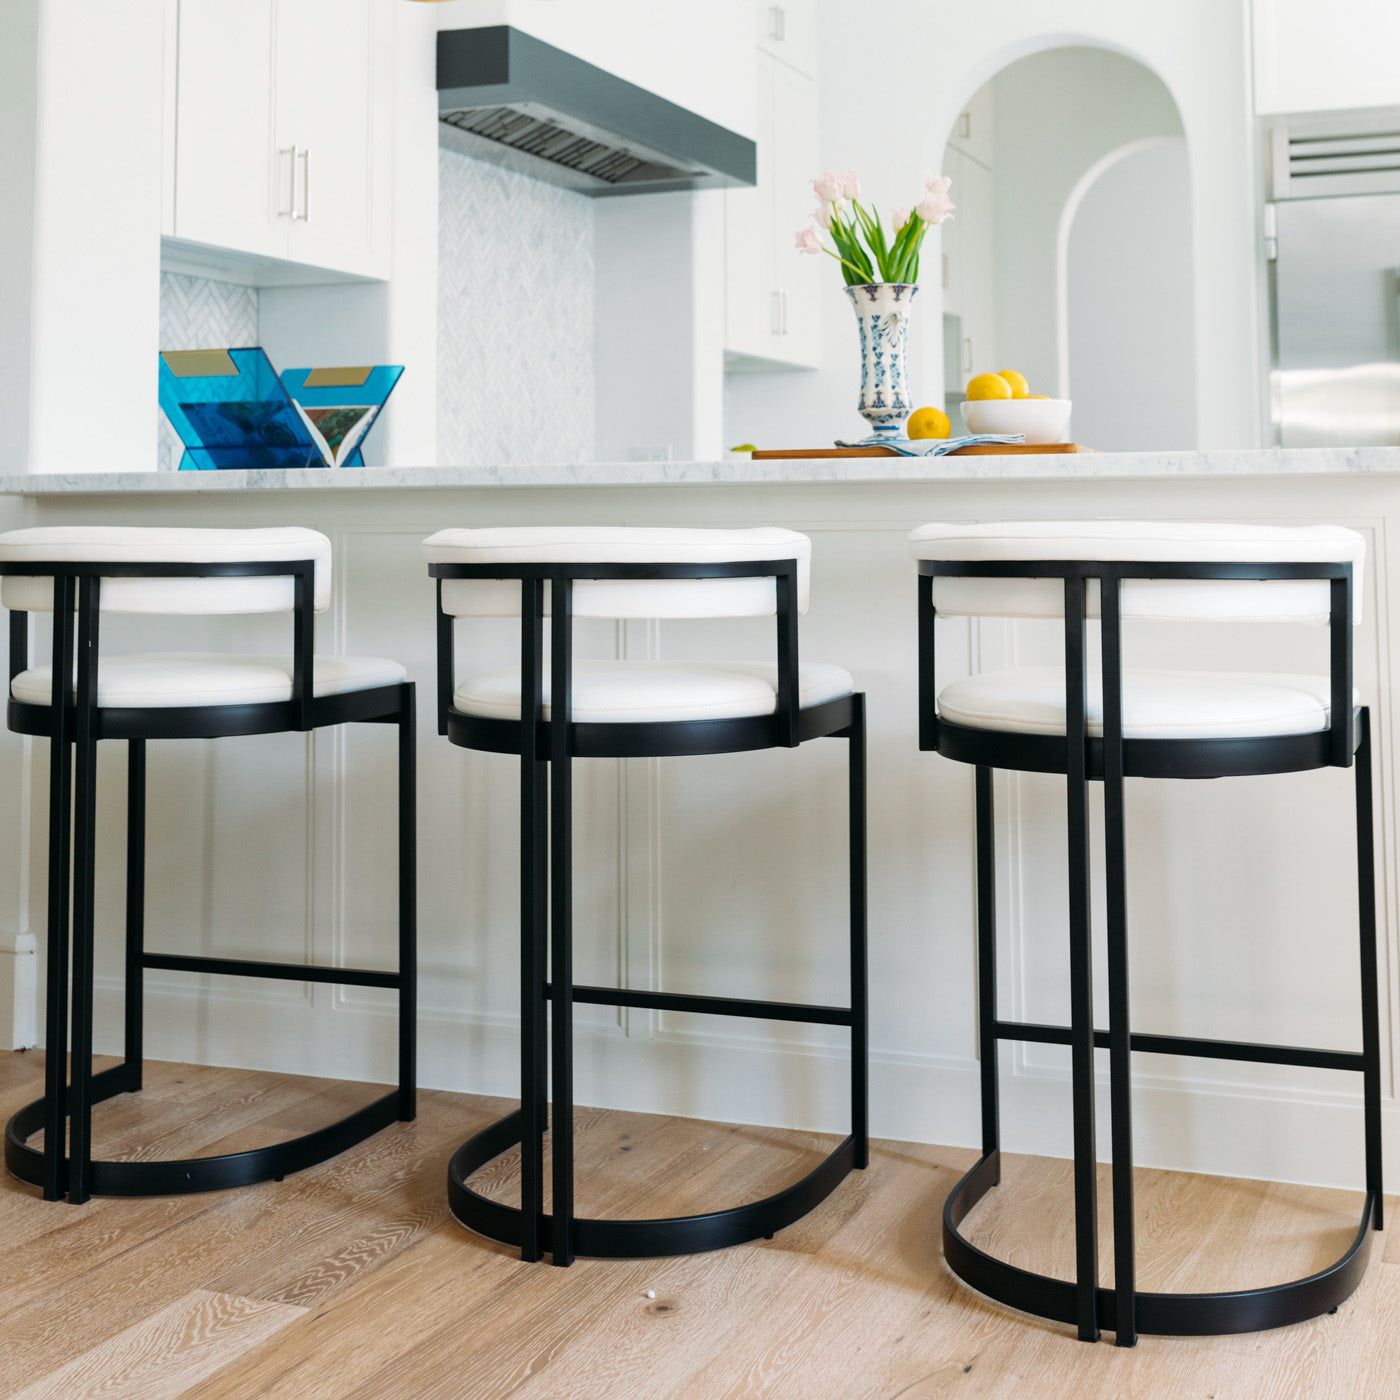 The Timeless Elegance of Black and White Counter Stools: A Classics That Never Goes Out of Style